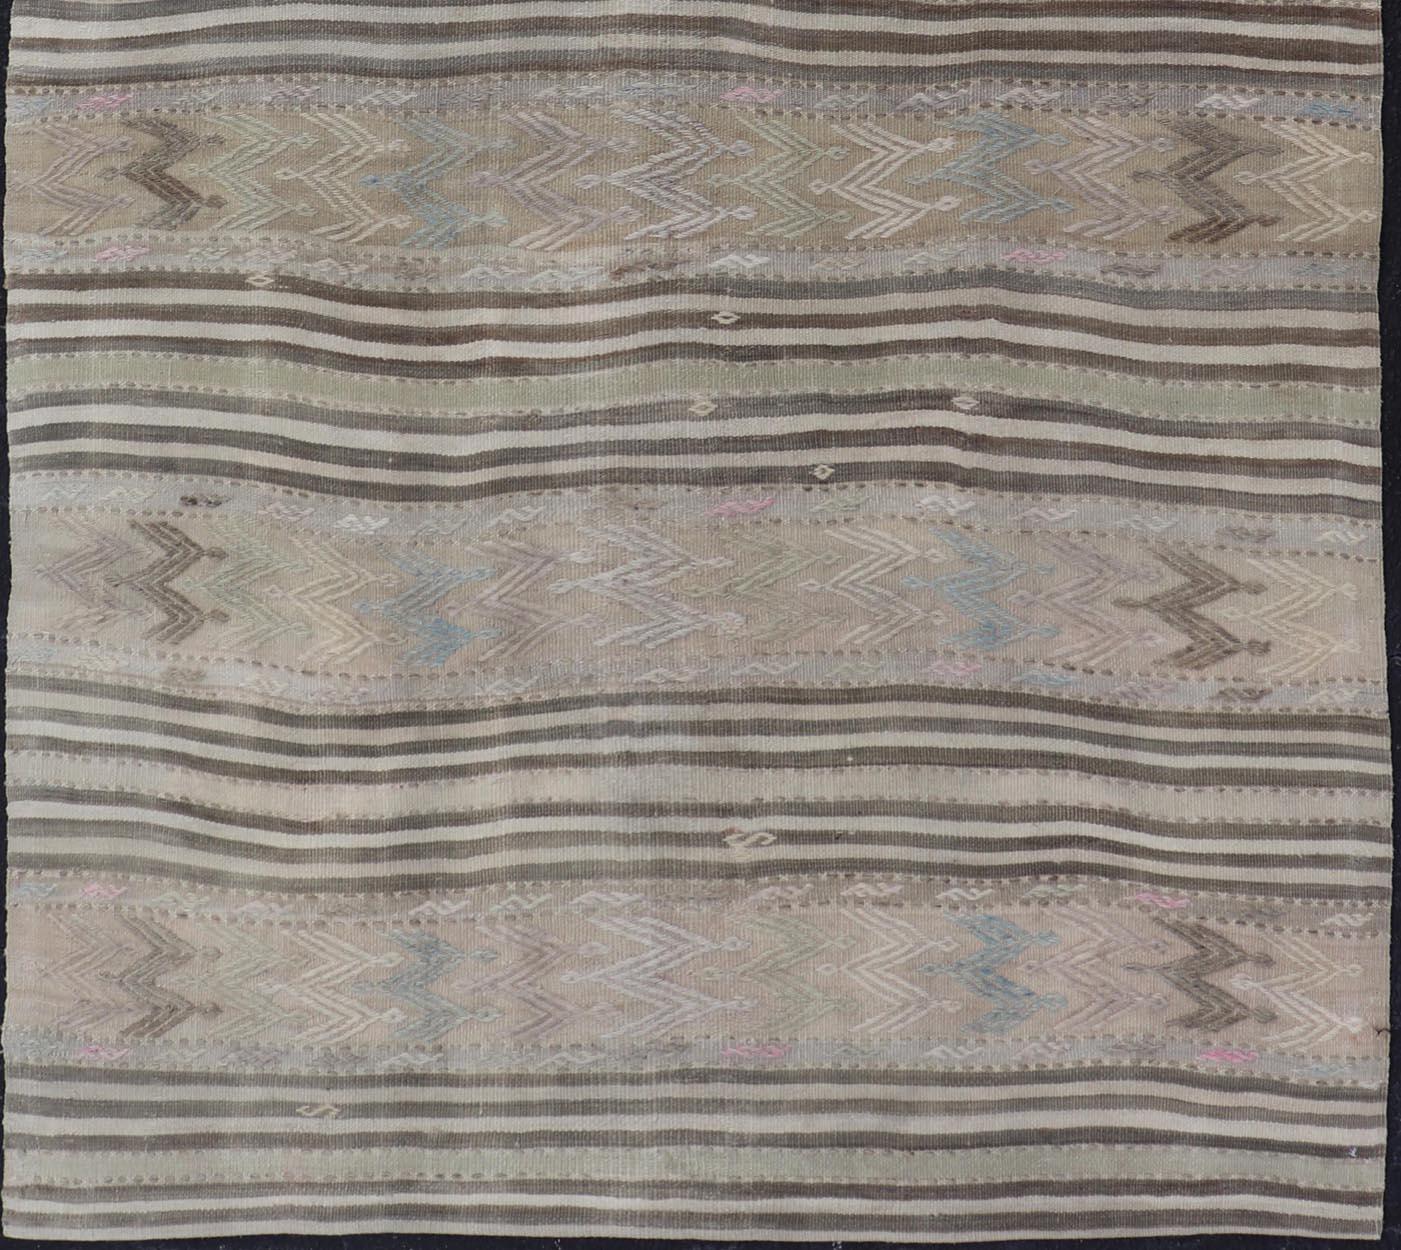 Vintage flat-weave Kilim with embroideries with a modern design in tan, brown,  green and blue geometric stripe design. Vintage Kilim from Turkey, Keivan Woven Arts / rug EN-179500, country of origin / type: Turkey / Kilim, circa 1950

Measures: 4'9